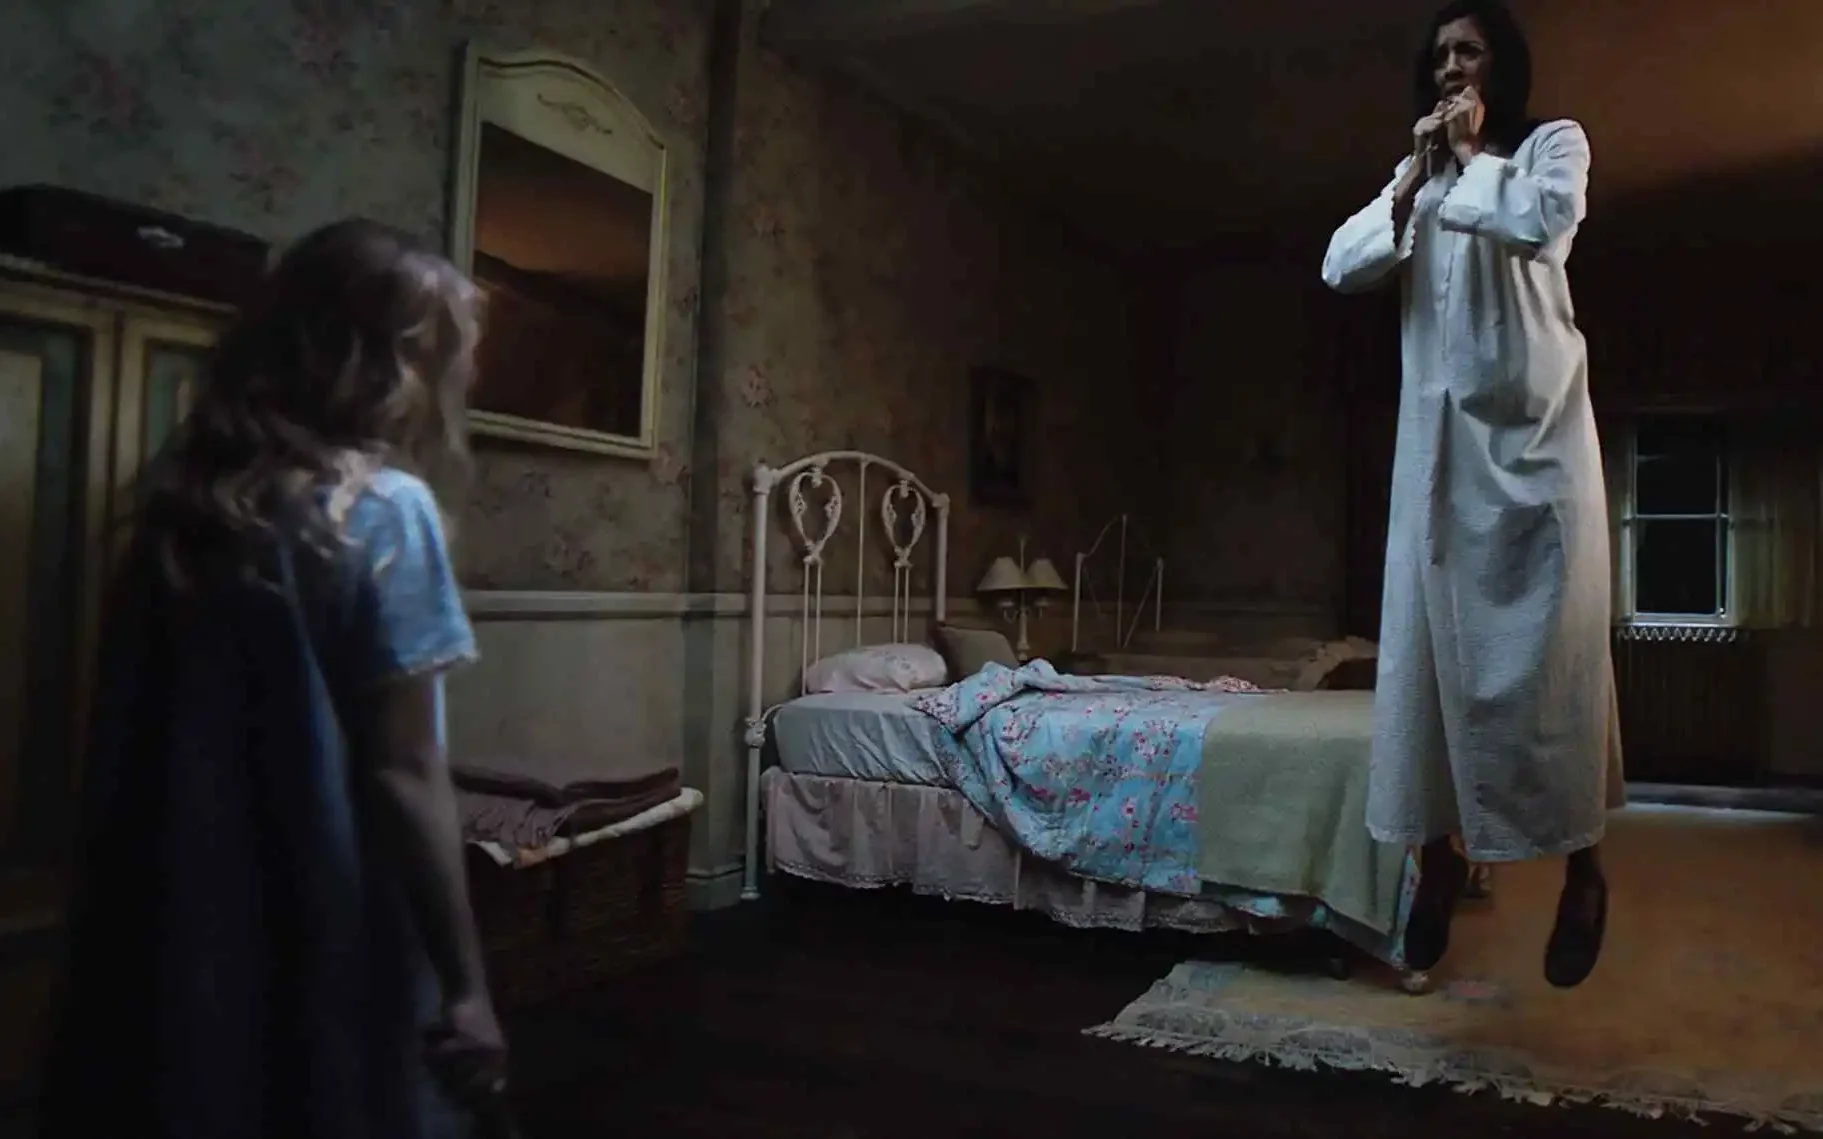 40 Horror Movies Like The Conjuring To Make You Scream In Fear!